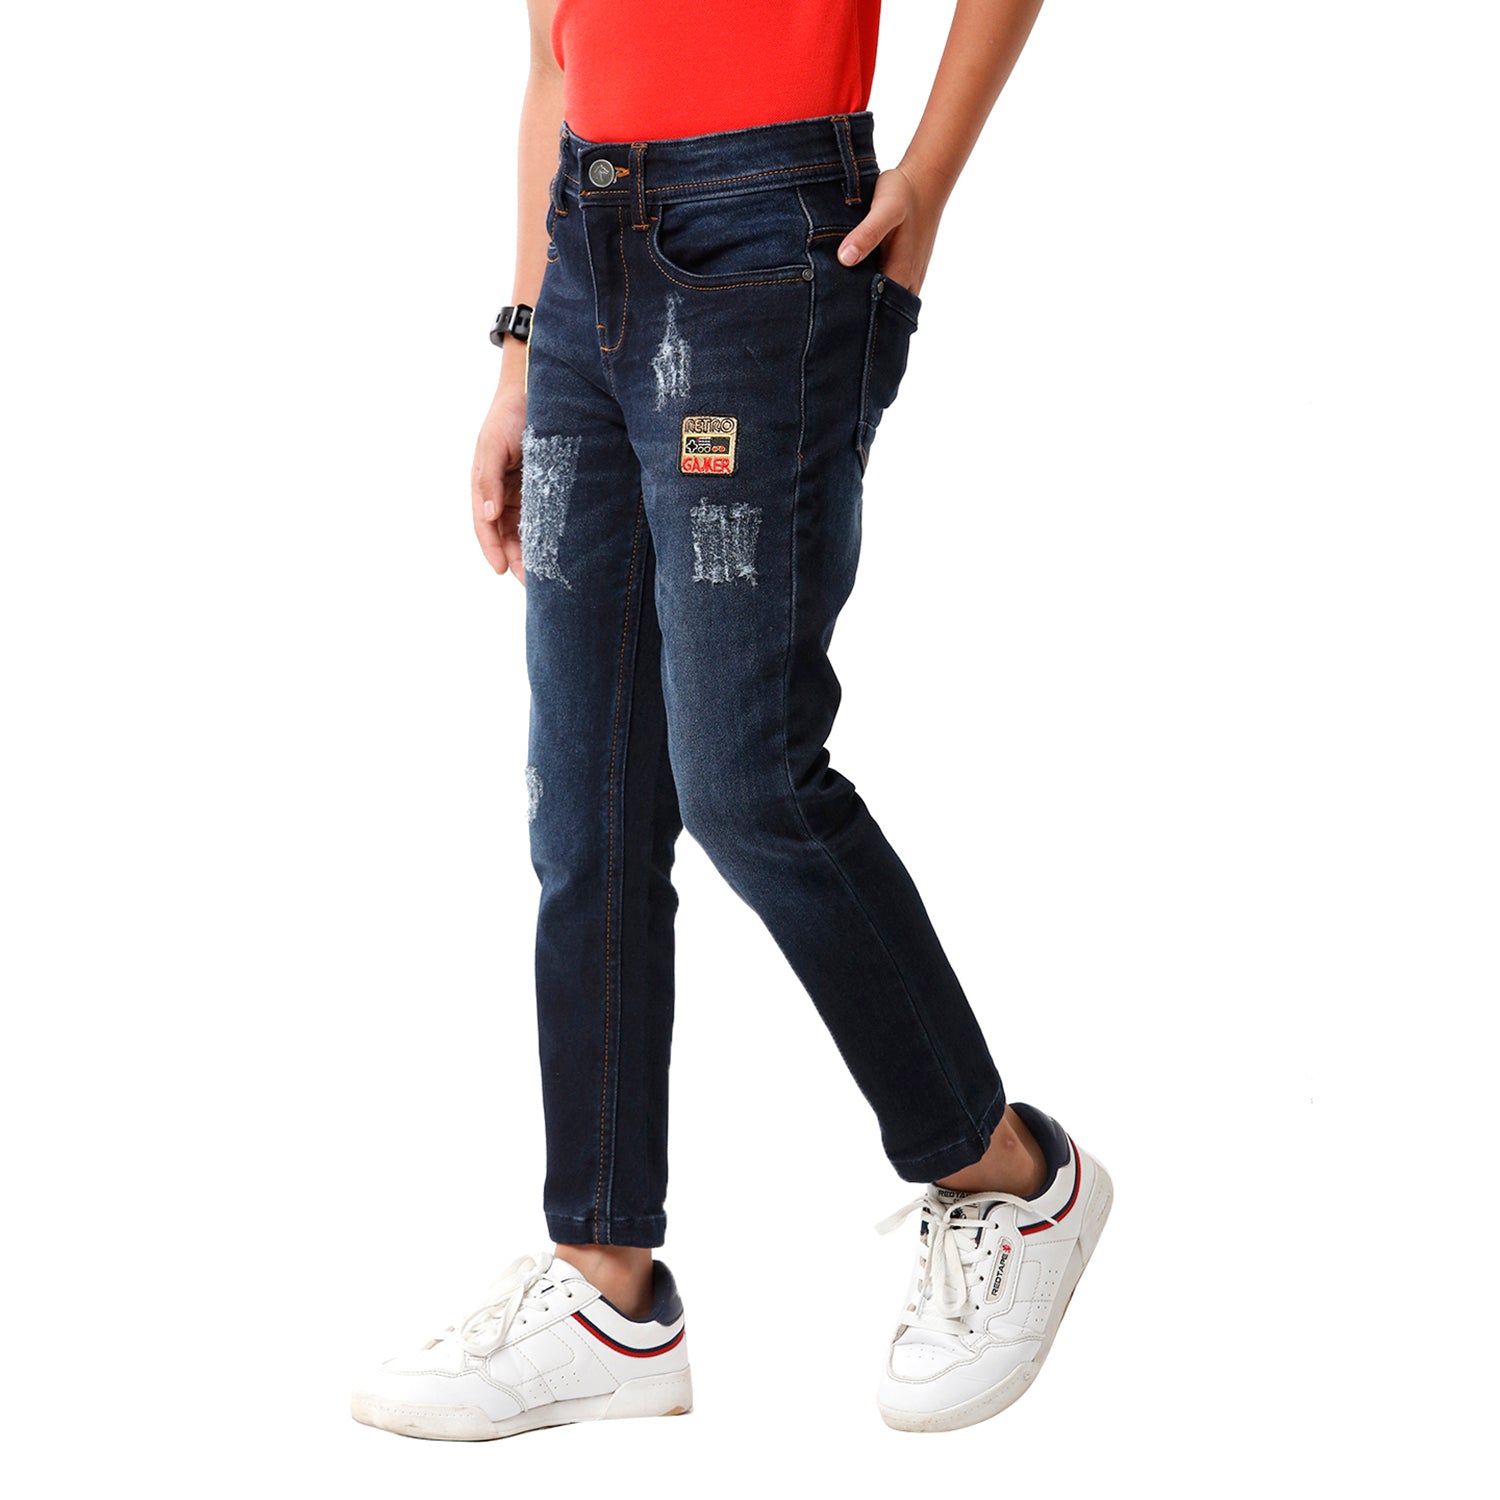 Classic Polo Bro Boys Cotton Solid Slim Fit Navy Blue Color Denim Jeans - BBD S1 02C Jeans Classic Polo 